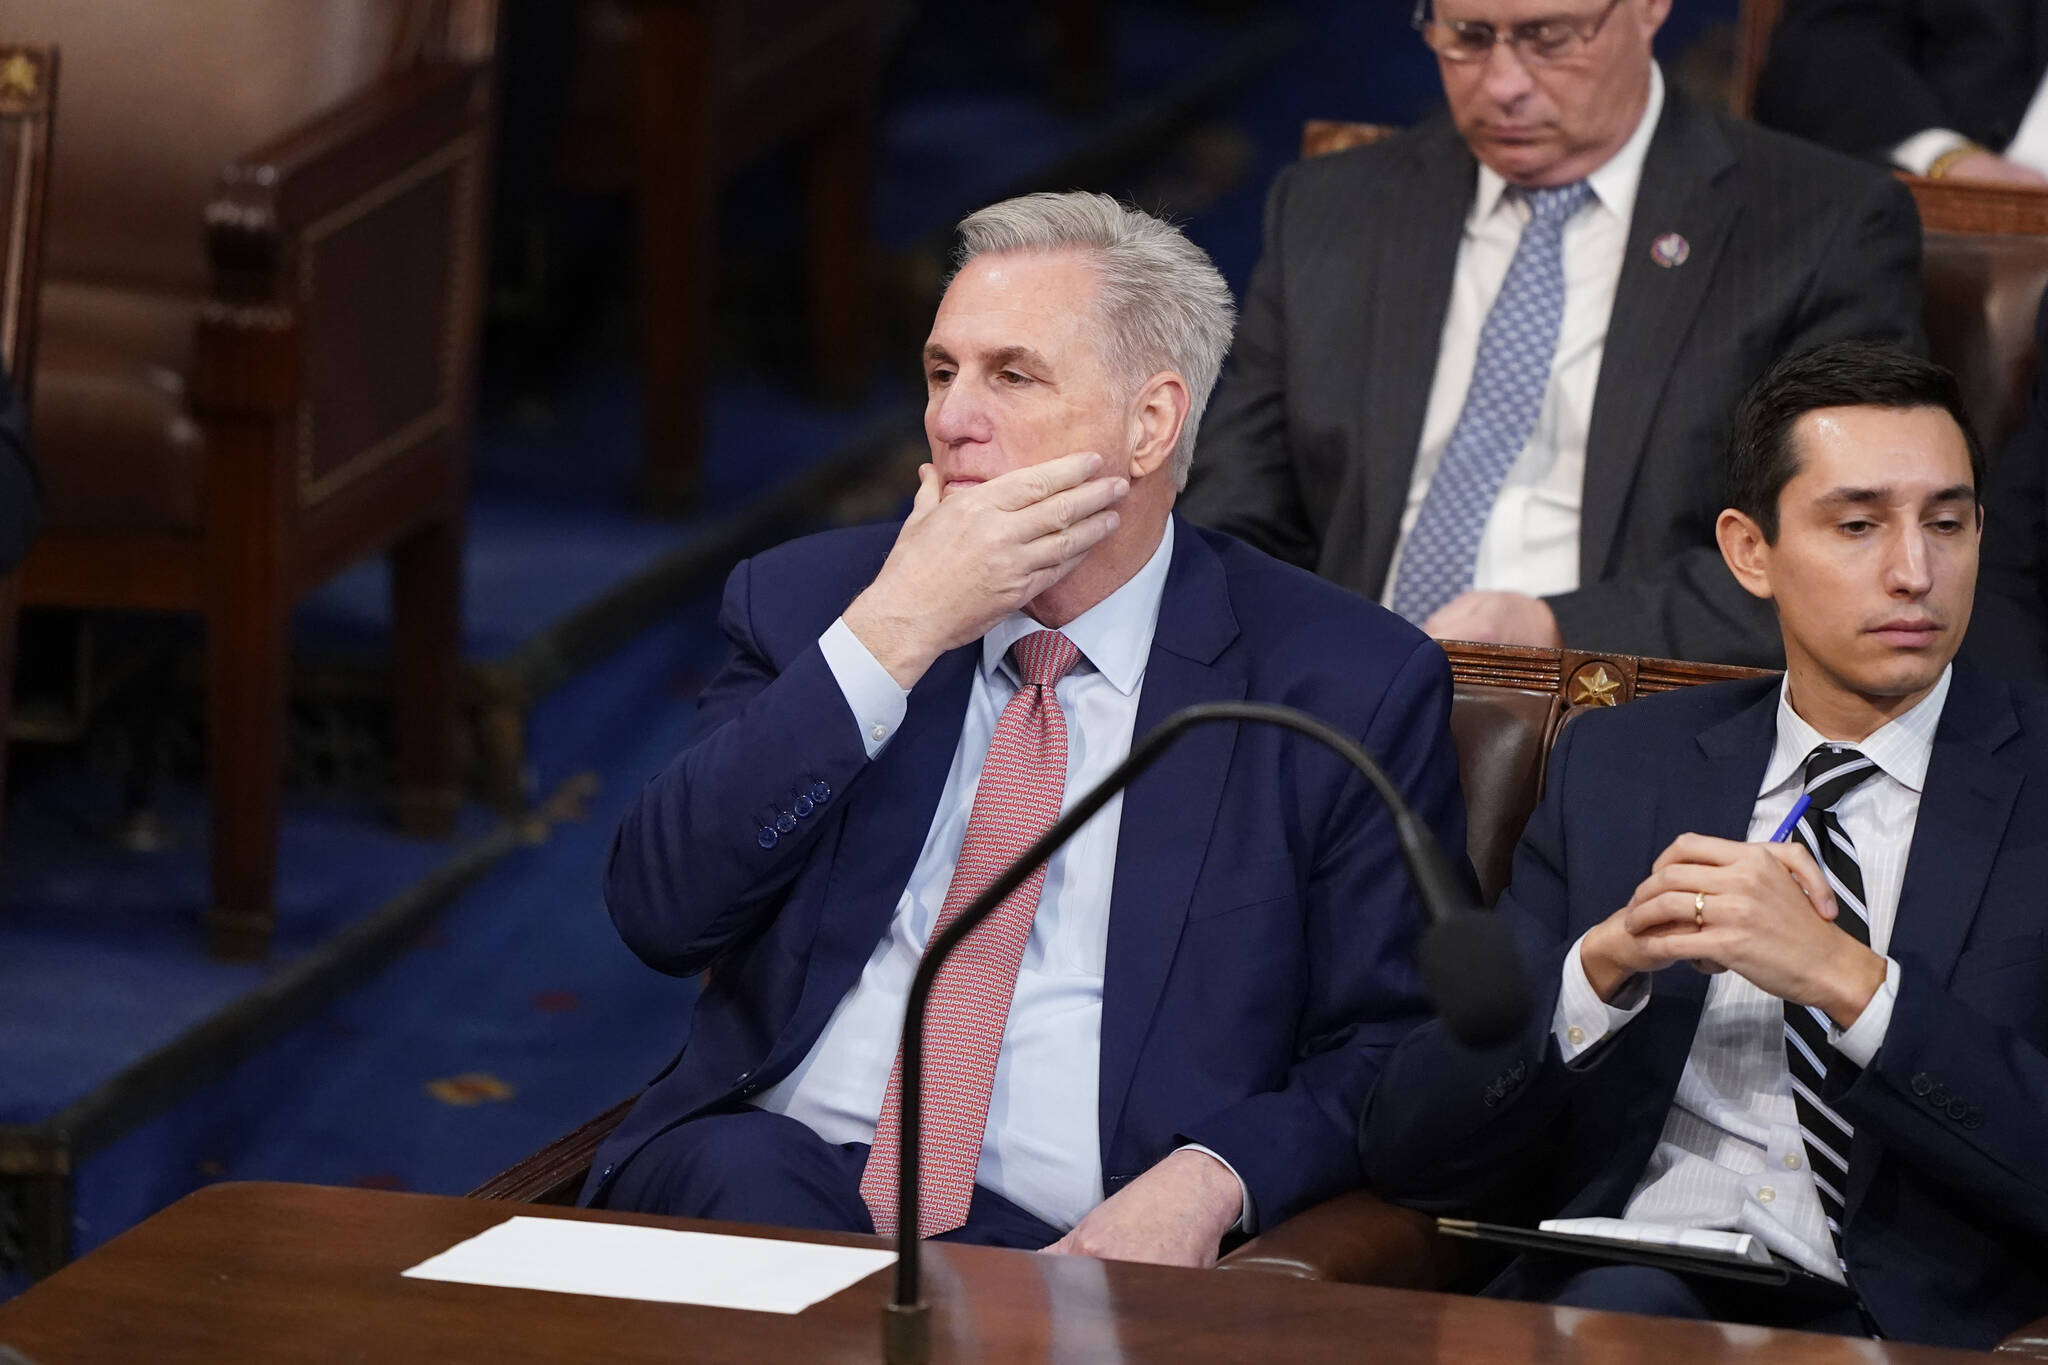 Rep. Kevin McCarthy, R-Calif., listens as the second round of votes are cast for the next Speaker of the House on the opening day of the 118th Congress at the U.S. Capitol, Tuesday, Jan. 3, 2023, in Washington.(AP Photo/Alex Brandon)